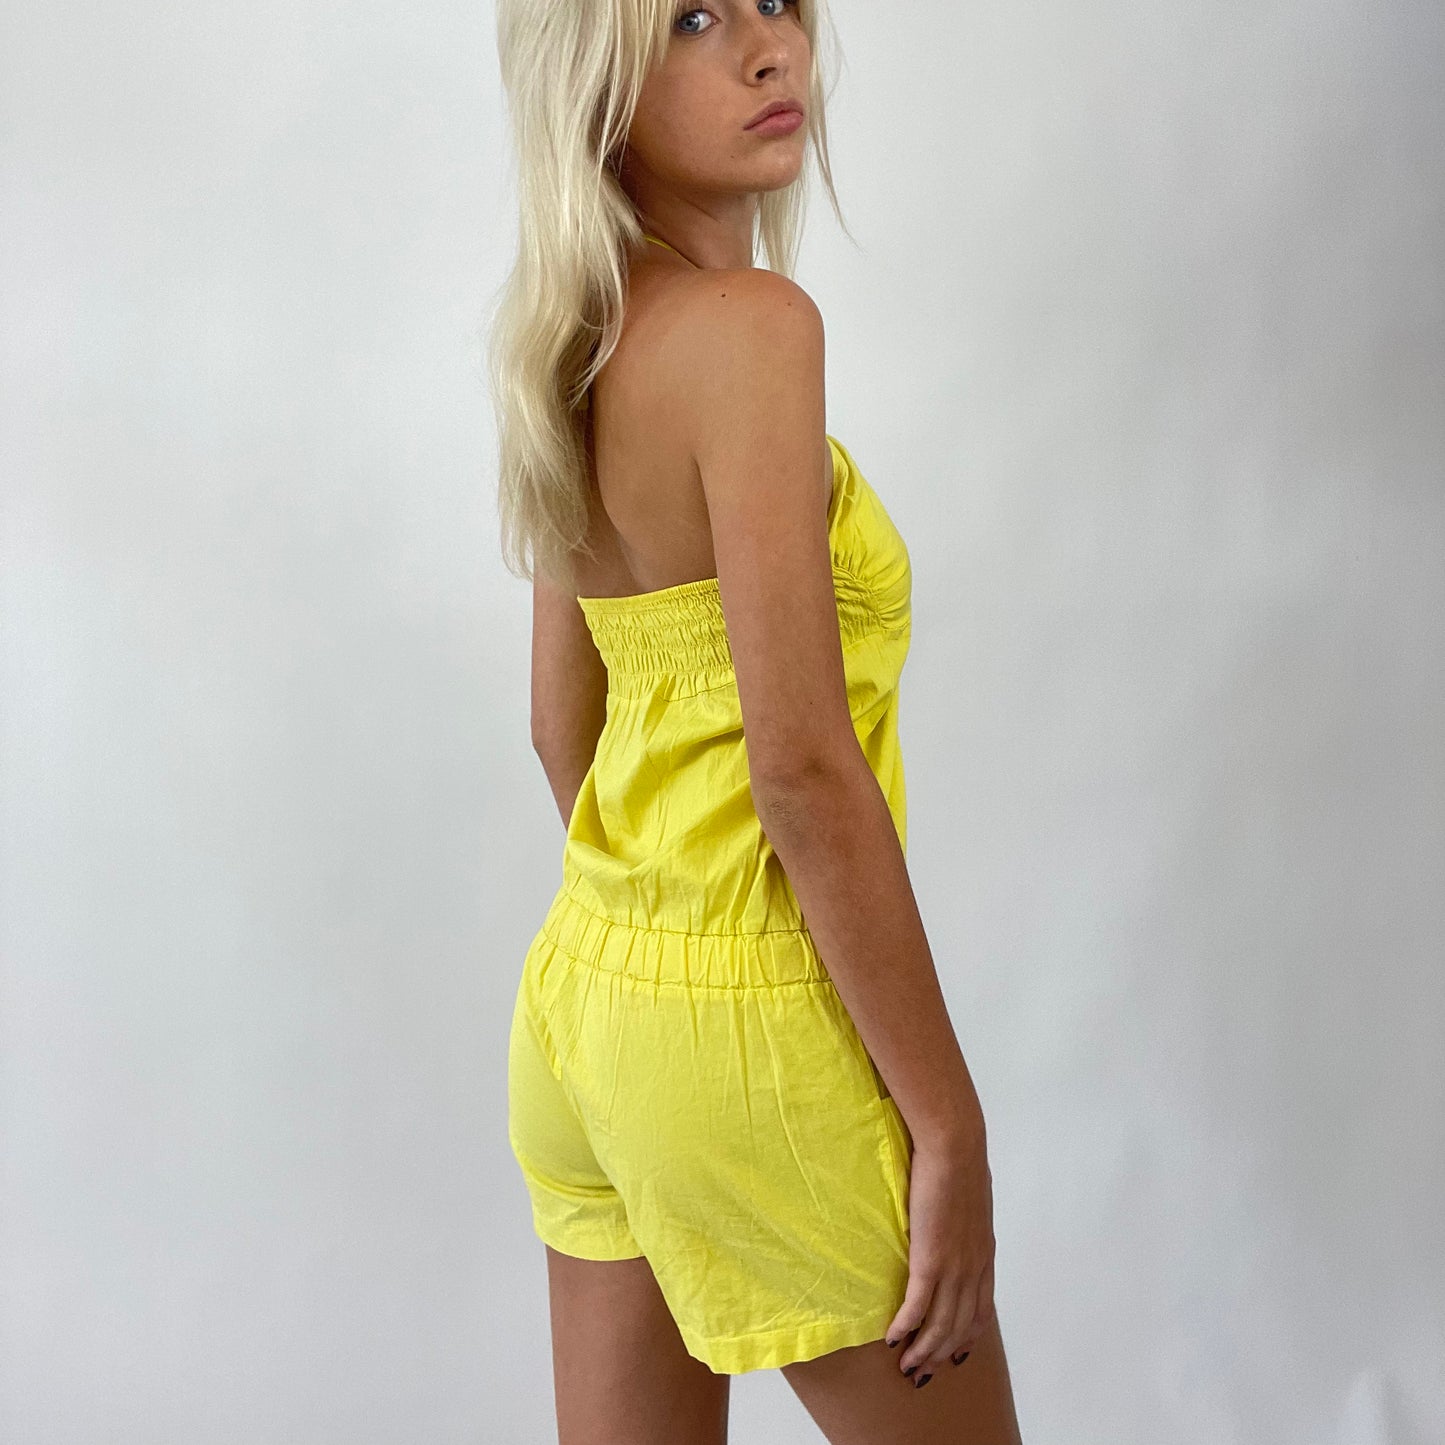 MISS REMASS DROP | small yellow playsuit